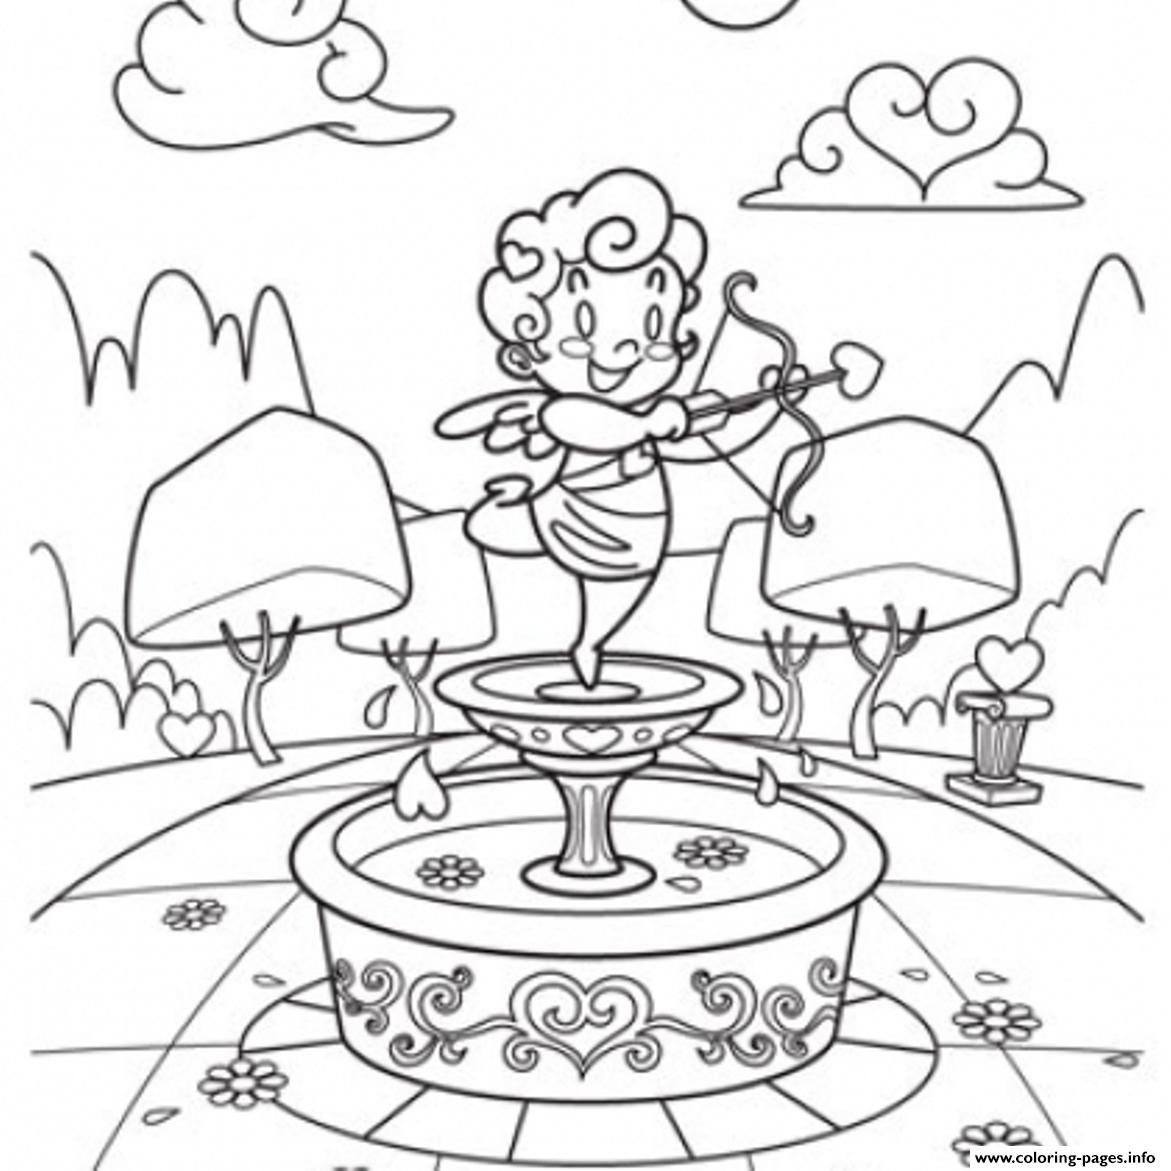 Angry Birds Valentine Coloring Pages Cupid - Coloring Pages For ...